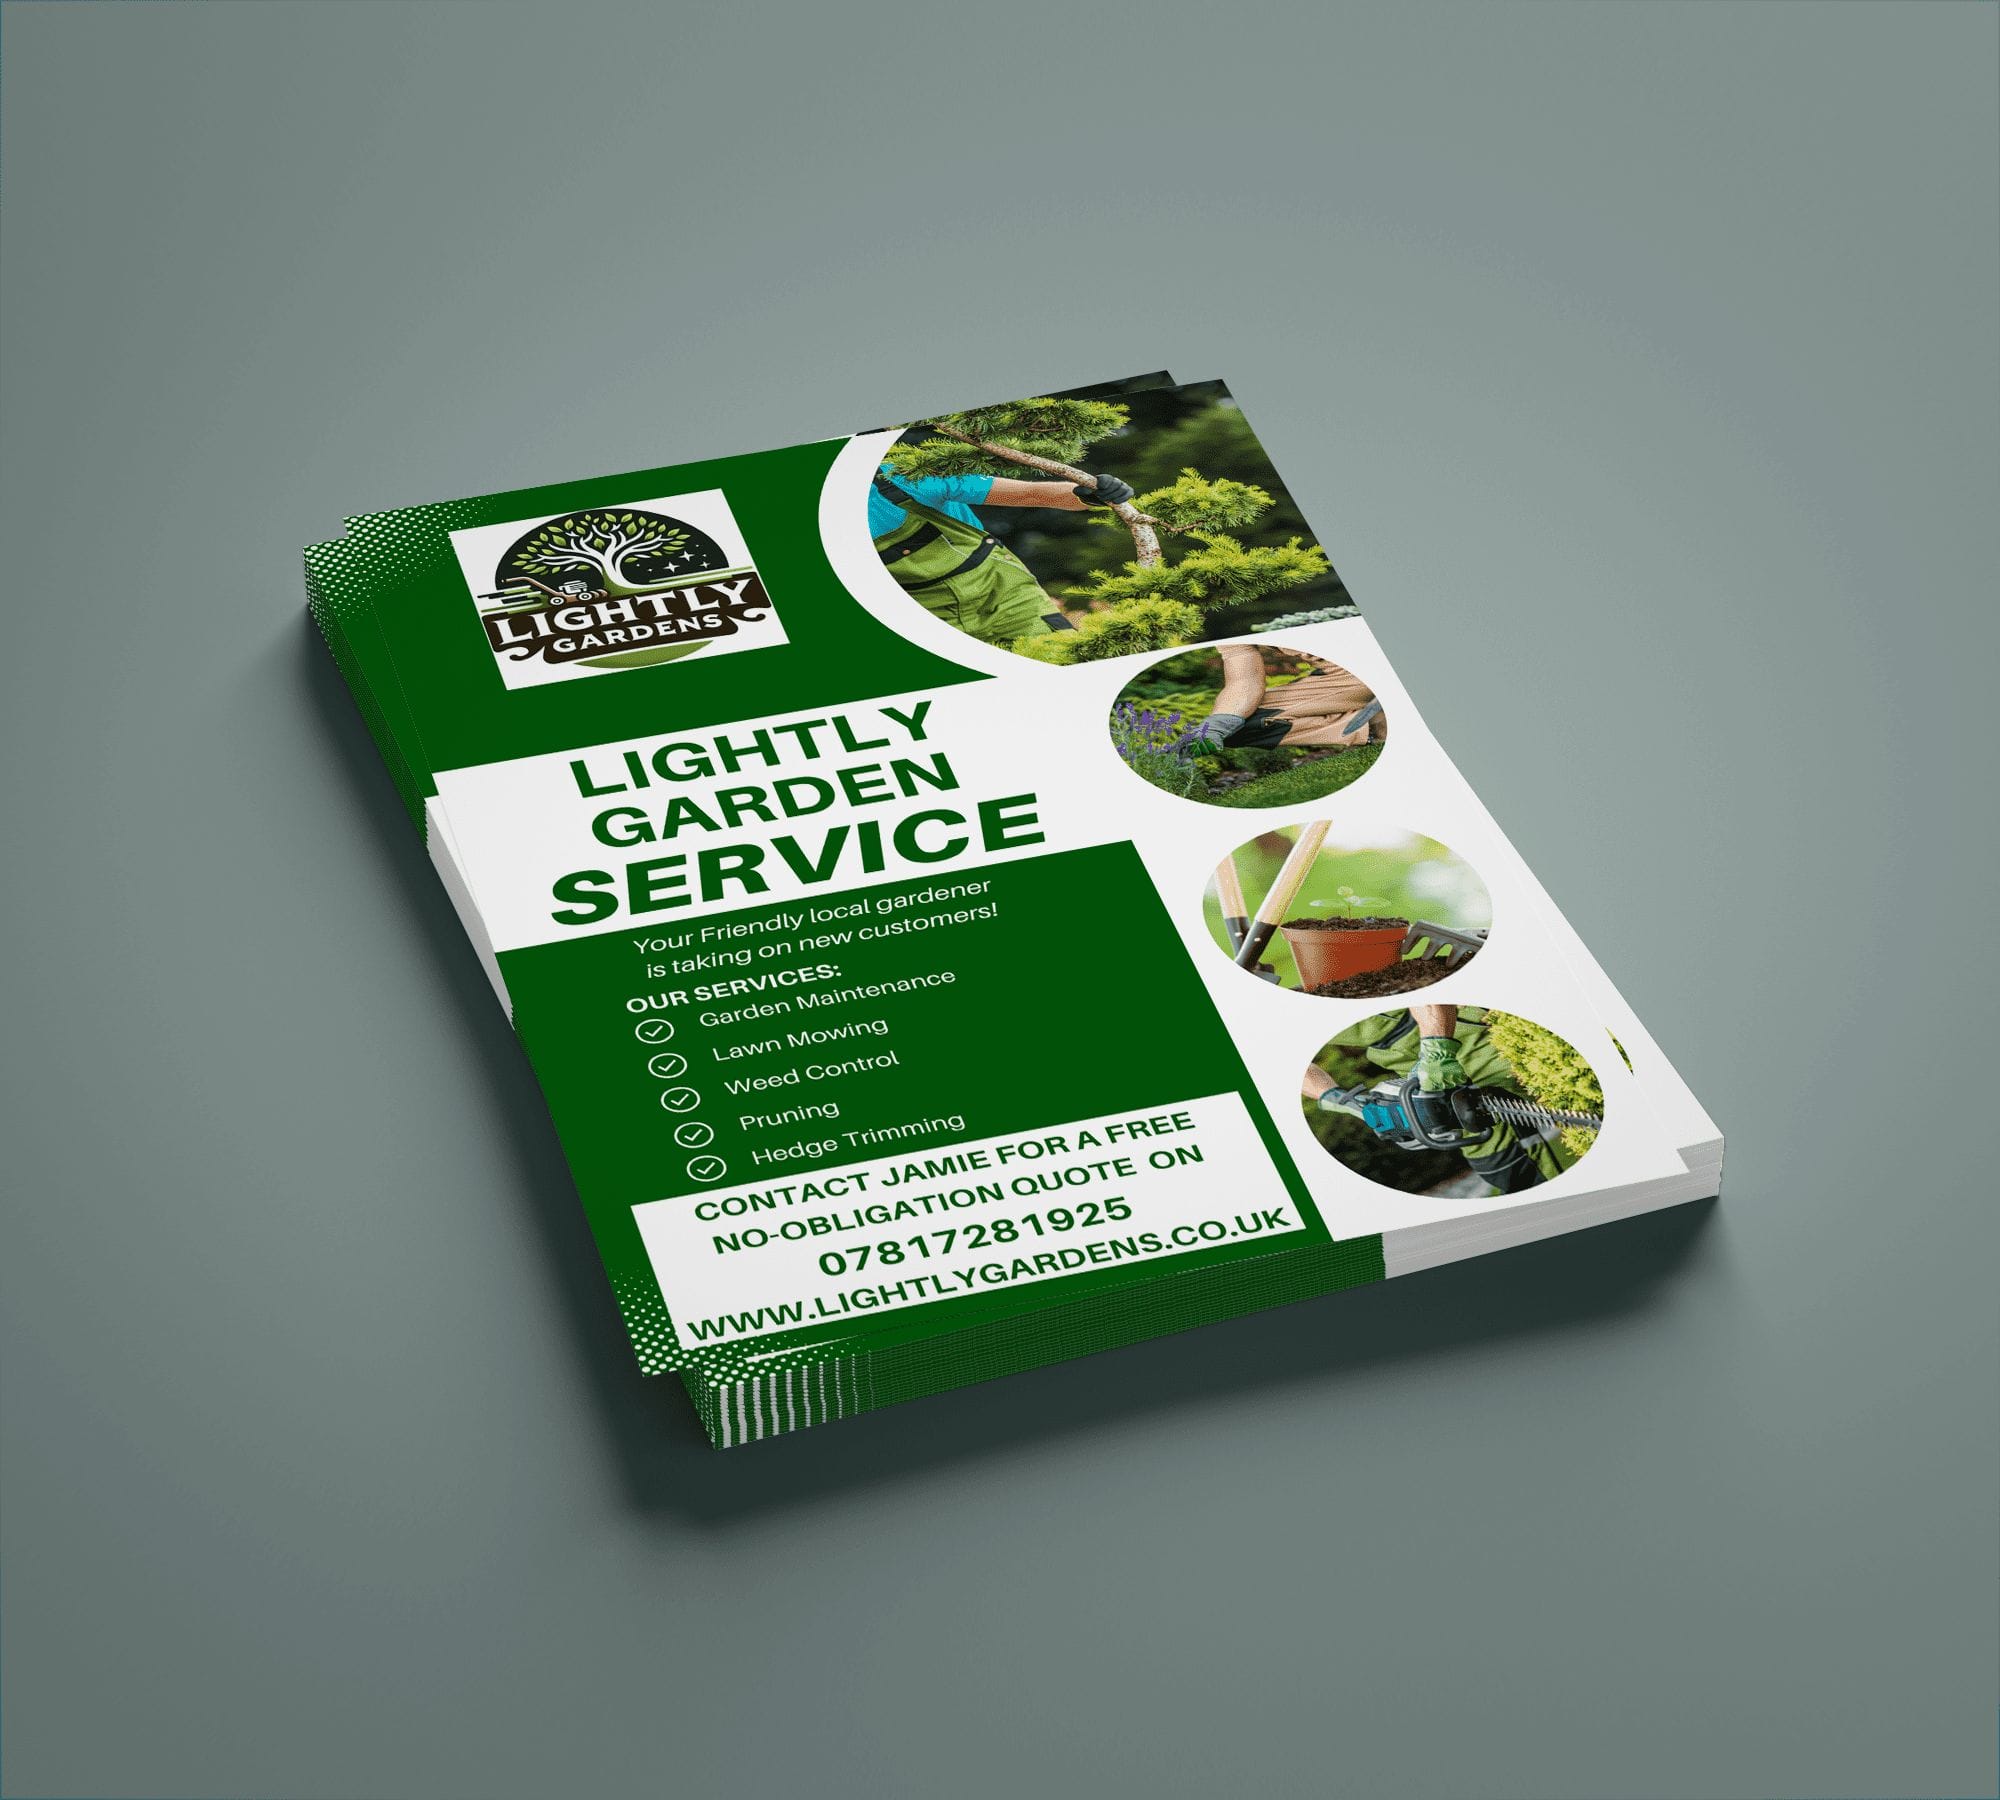 flyers for lightly garden service wirral.